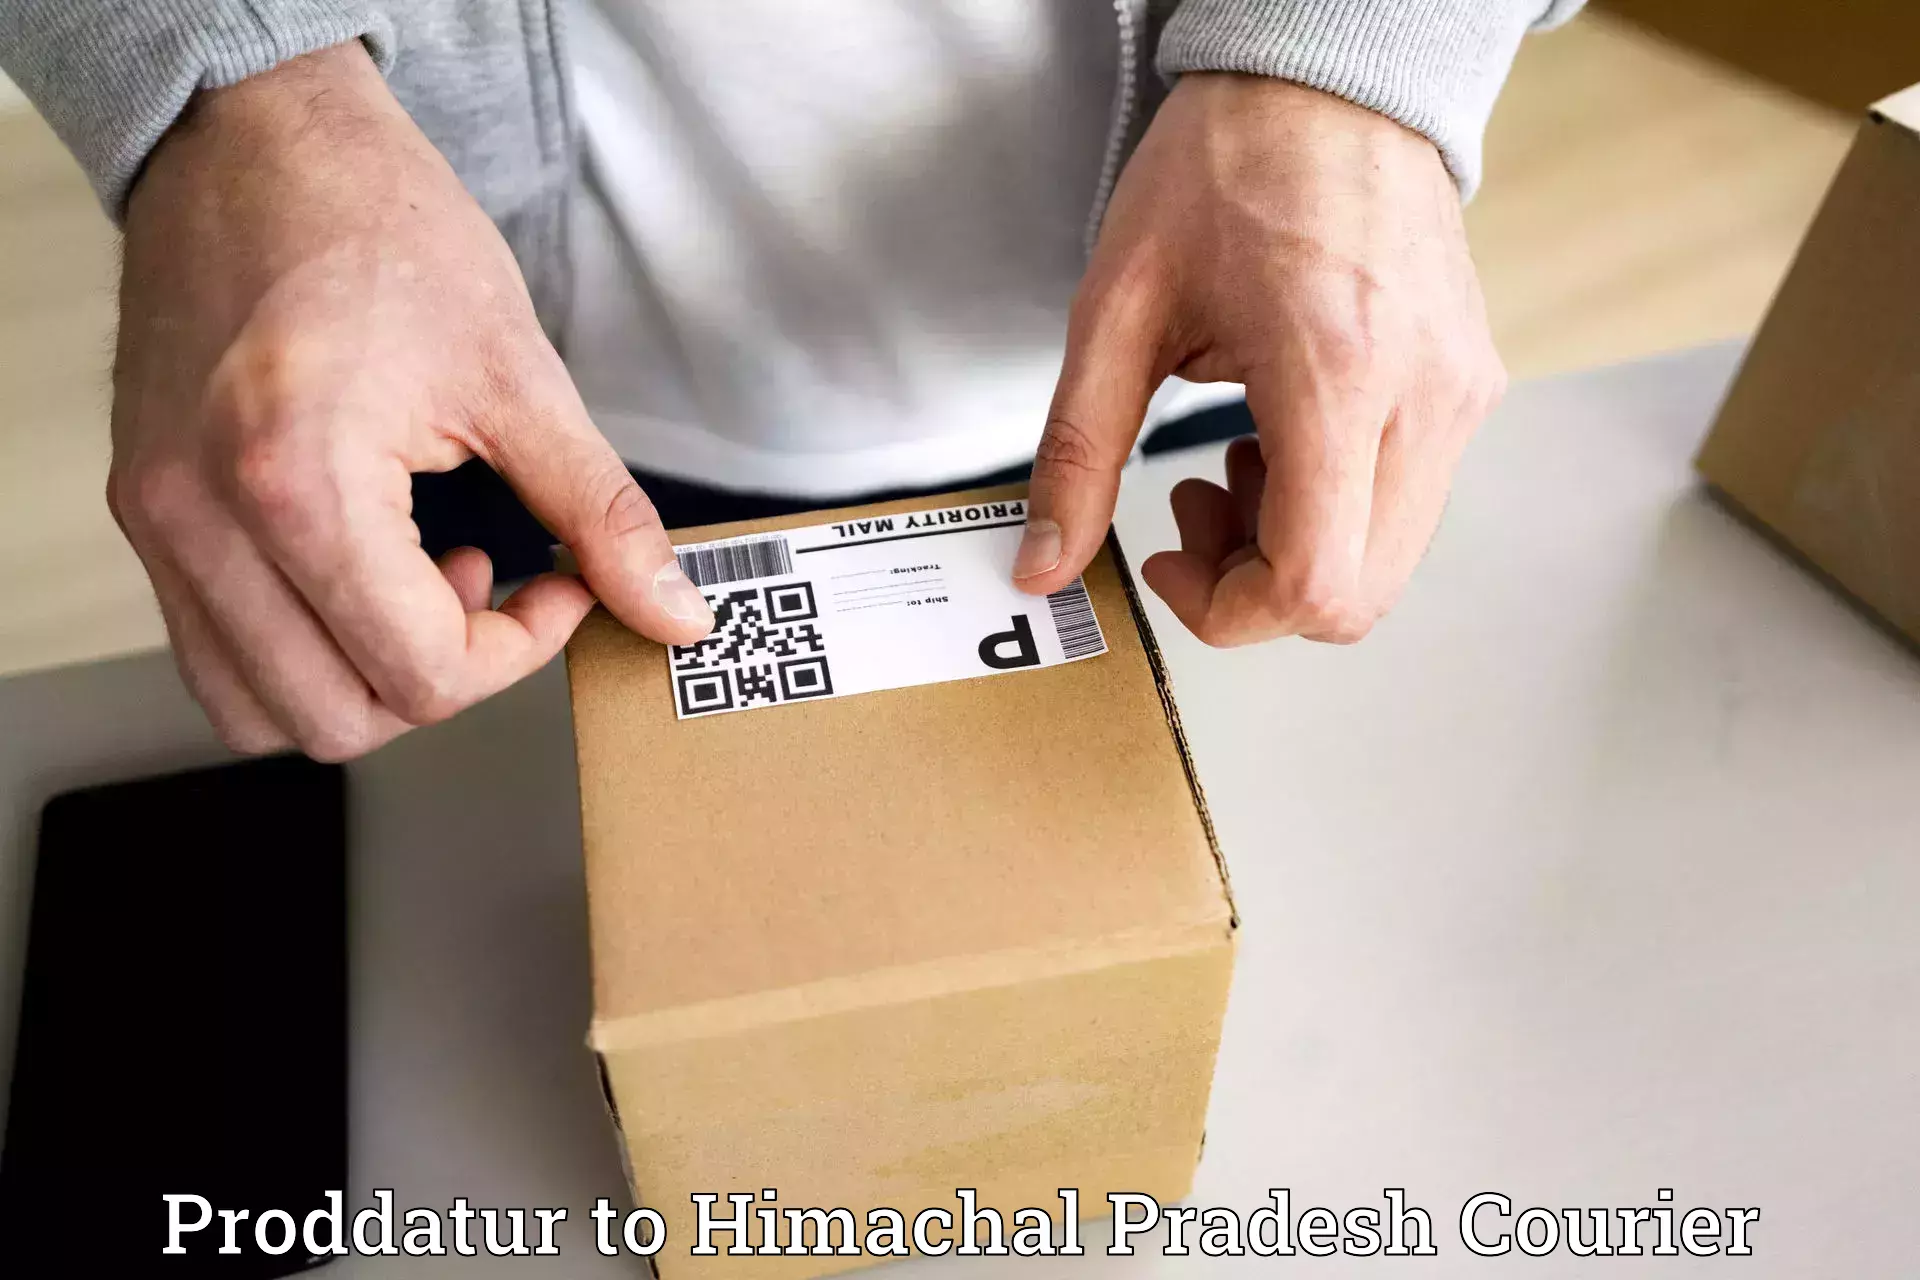 Online package tracking Proddatur to Salouni